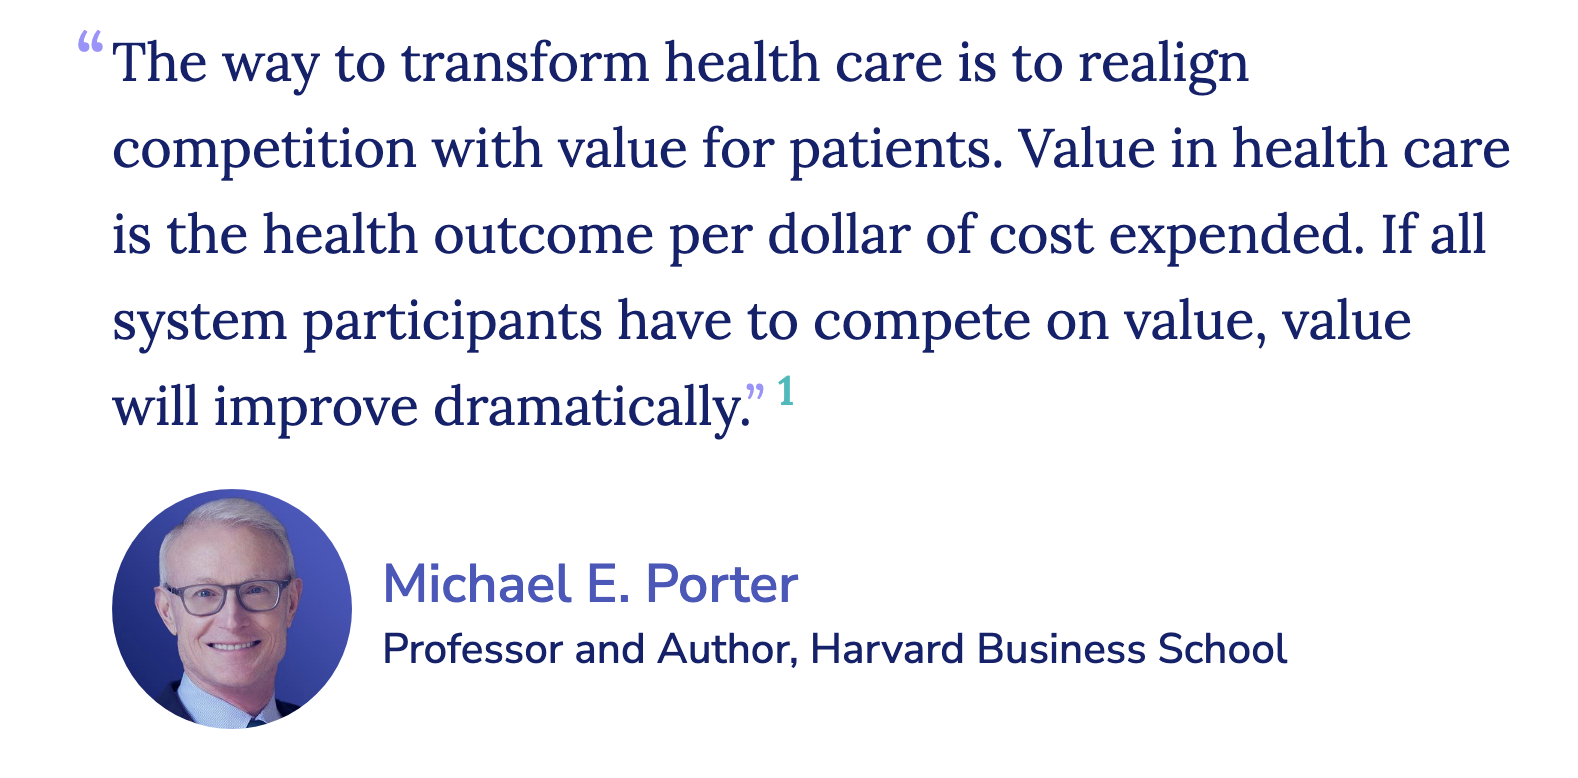 Quote by Michael E. Porter about measuring value in health care 